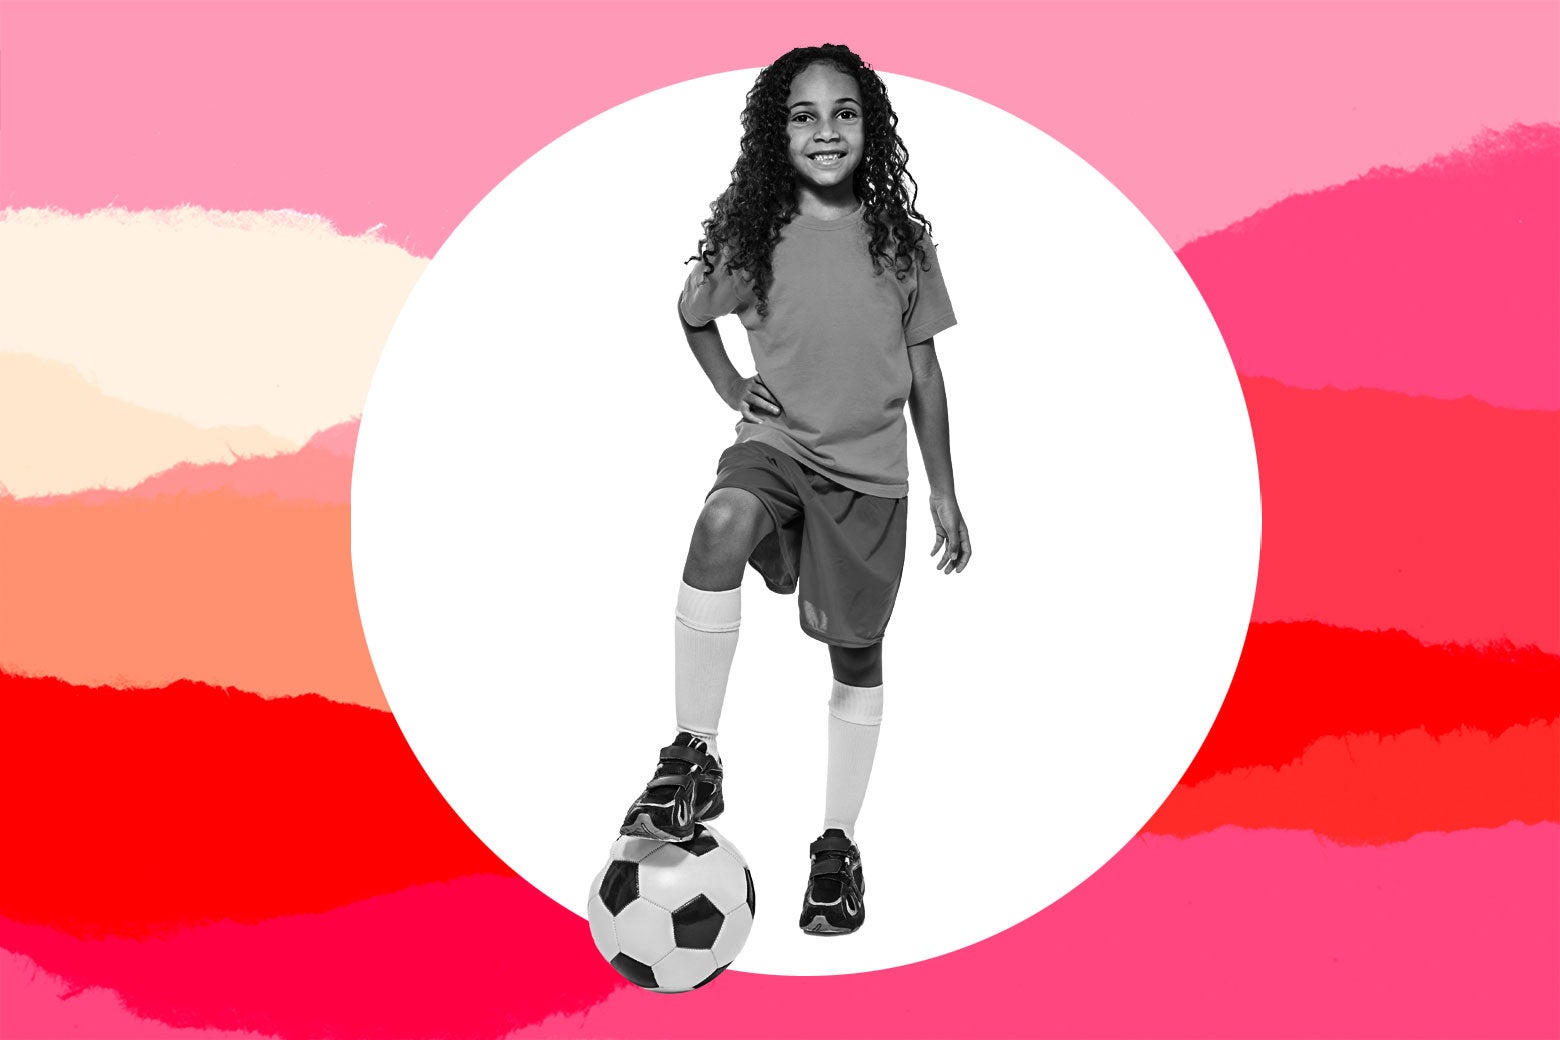 A girl in soccer gear smiles as she puts her foot on a soccer ball.